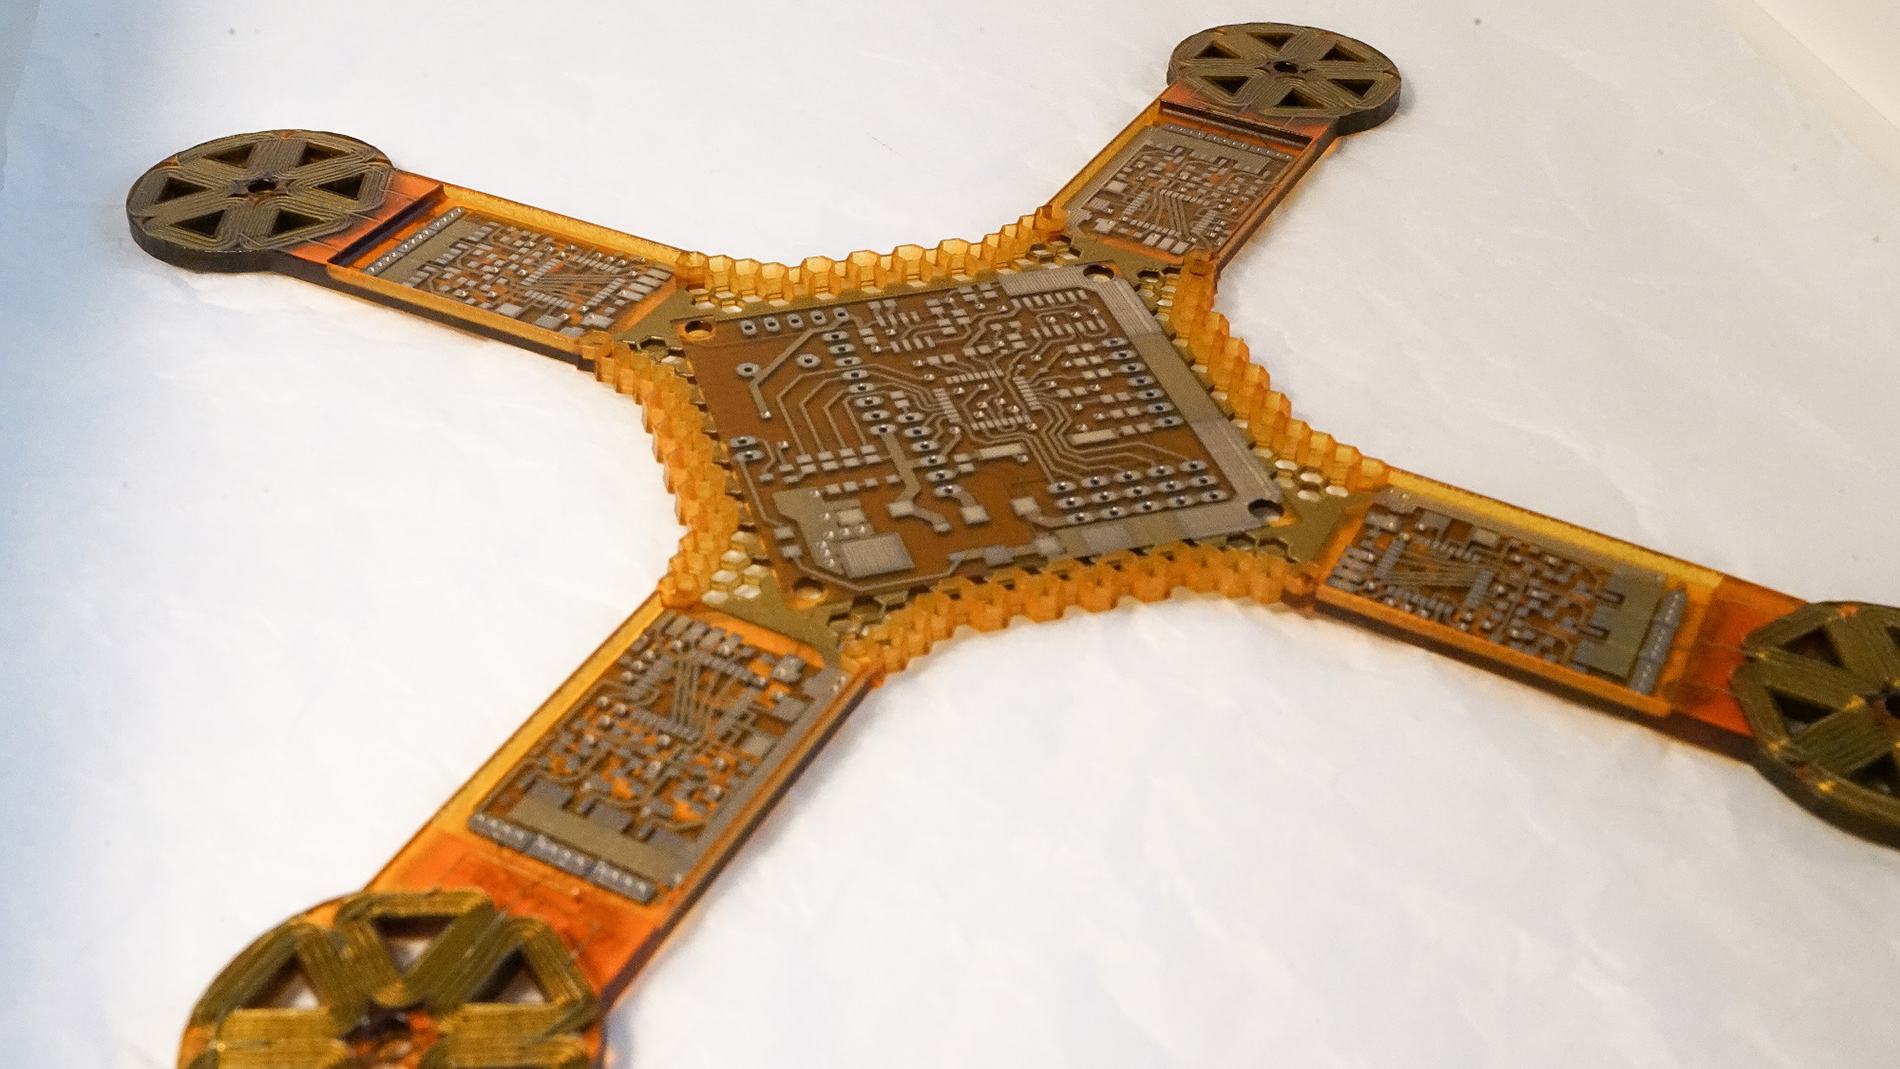 3D Printing of electronics is still a small field of Additive Manufacturing, but it promises enormous potential and a variety of new applications in the near future. The picture shows the basic electronic structure of a drone, including all the conductive tracks and the coils for the motors. Image: J.A.M.E.S.